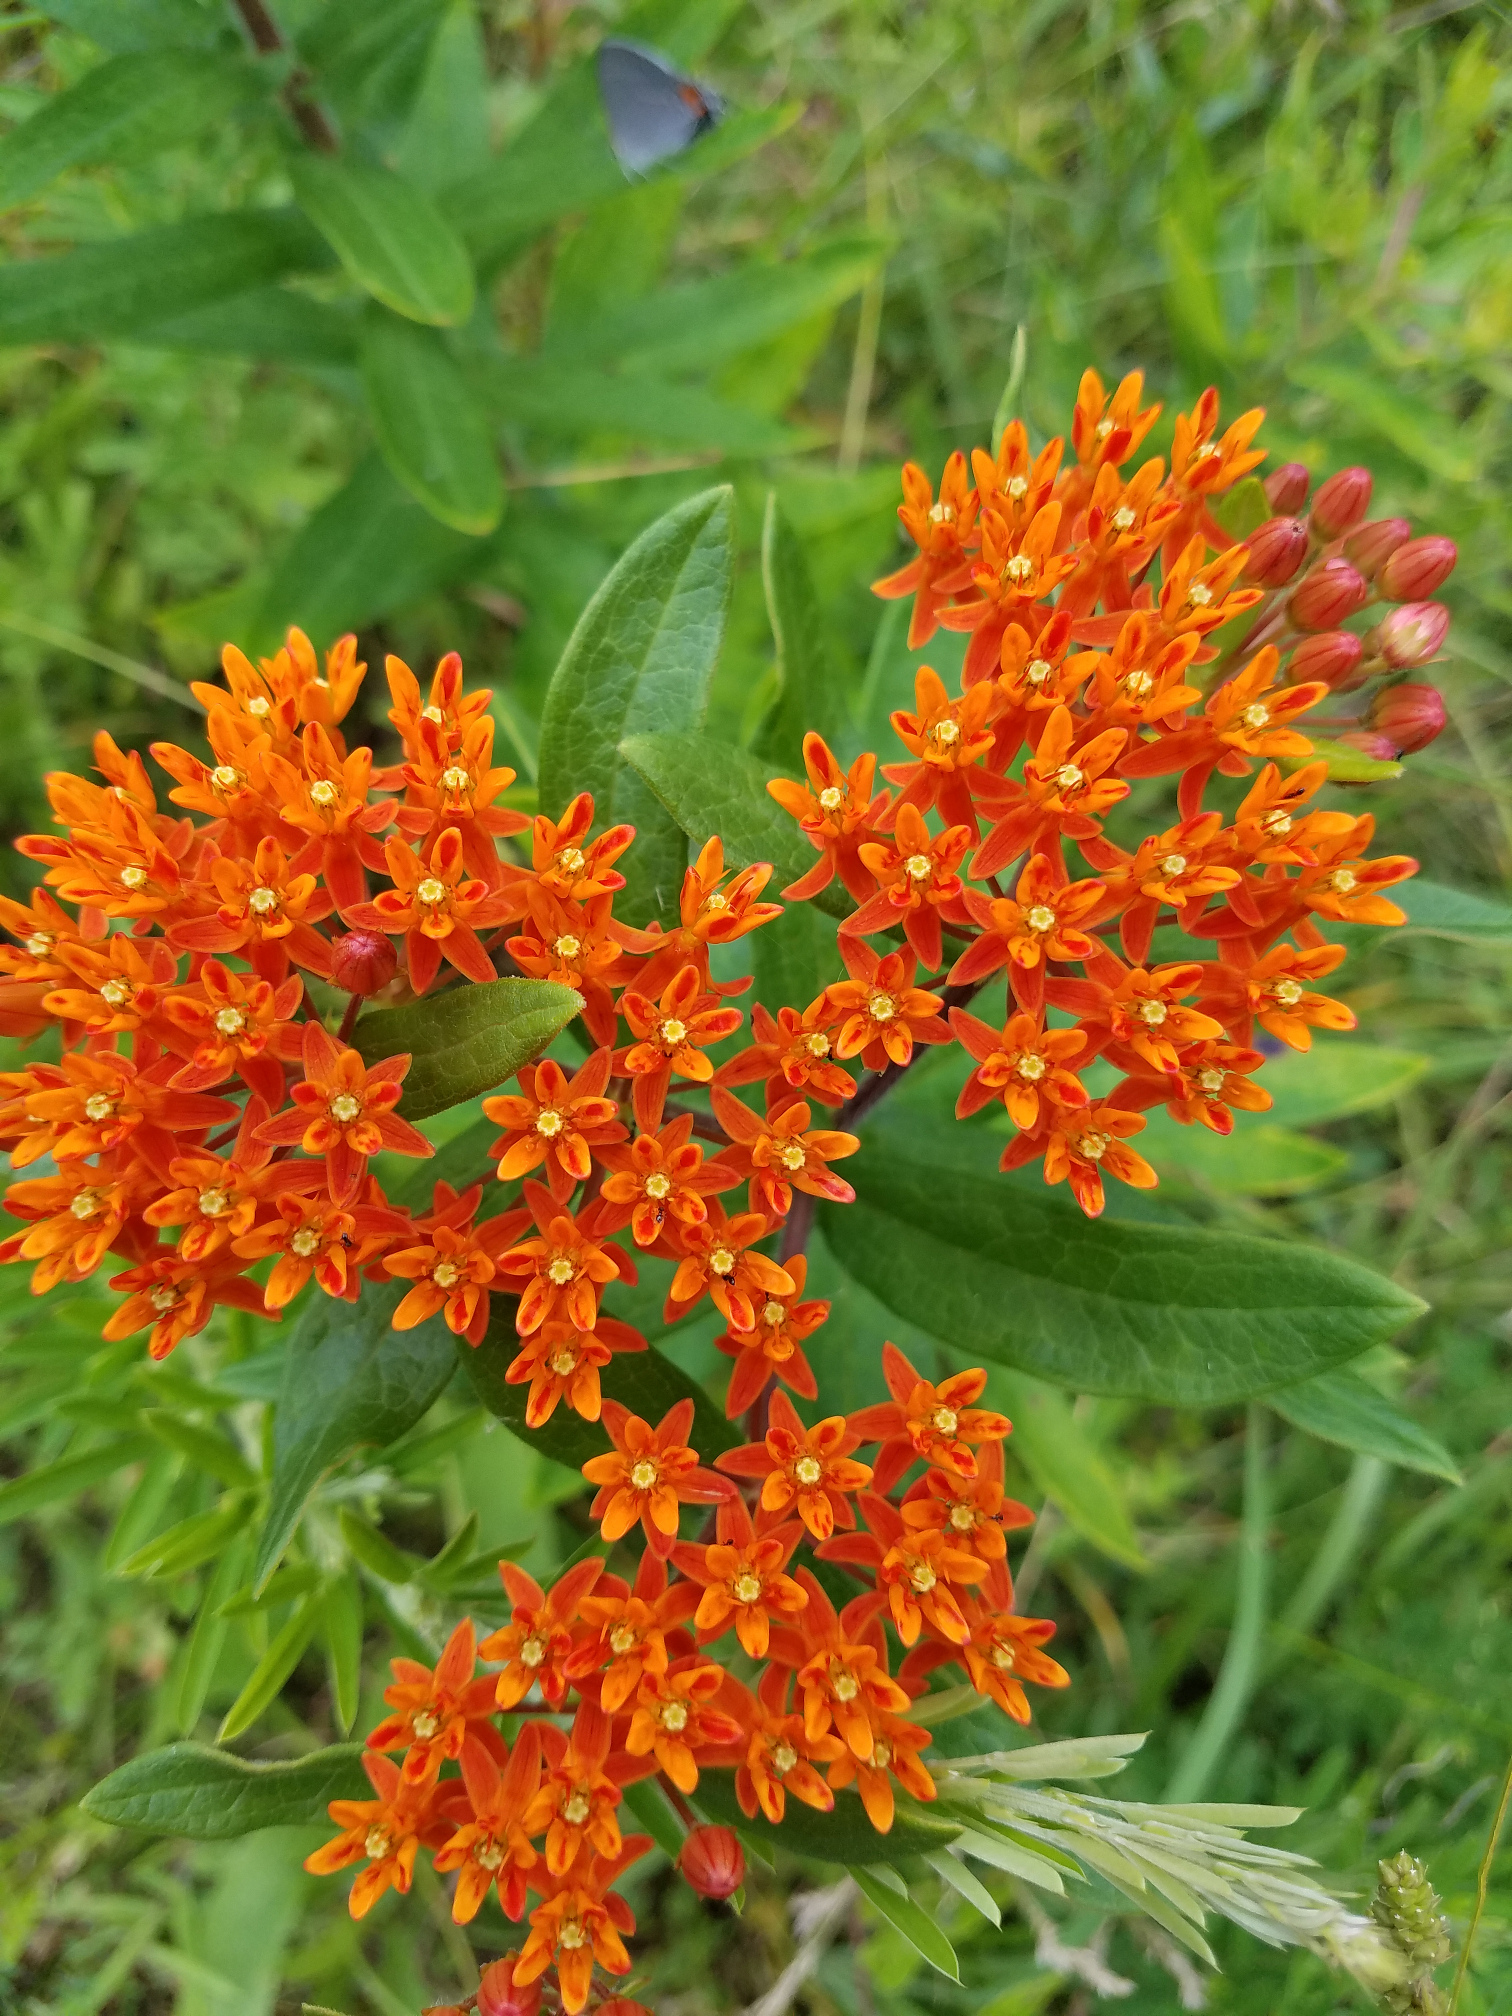 6-18-17 Butterfly Weed – Walters Honey